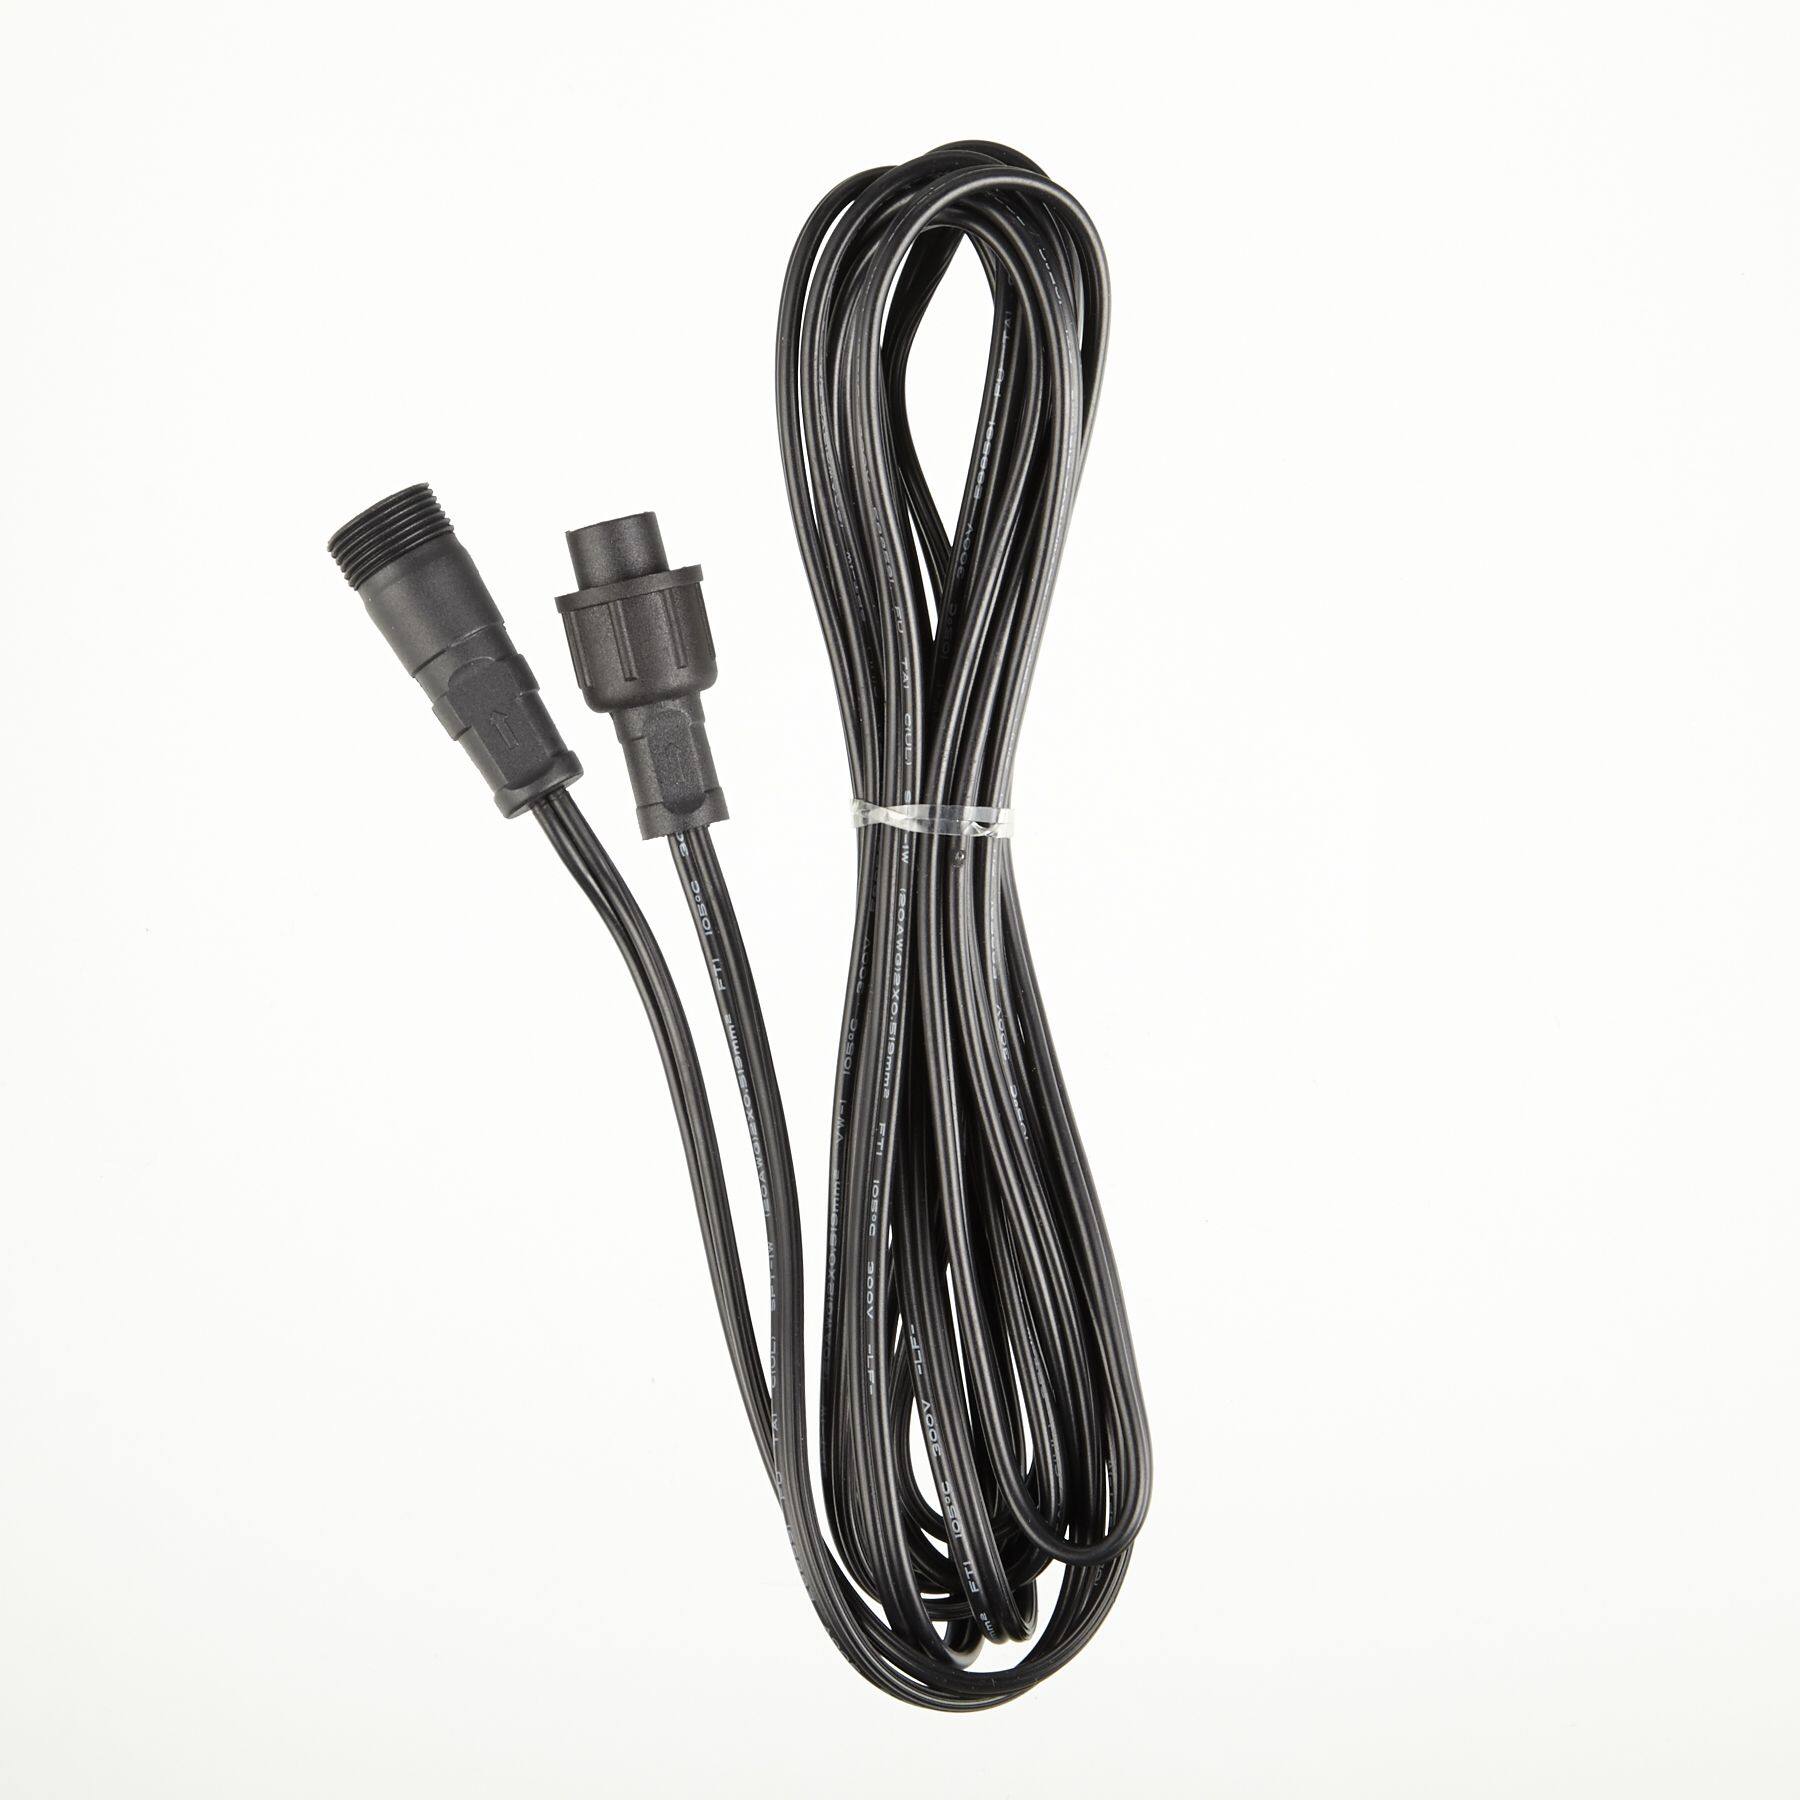 NOMA One Outlet Locking Extension Cord — Partsource